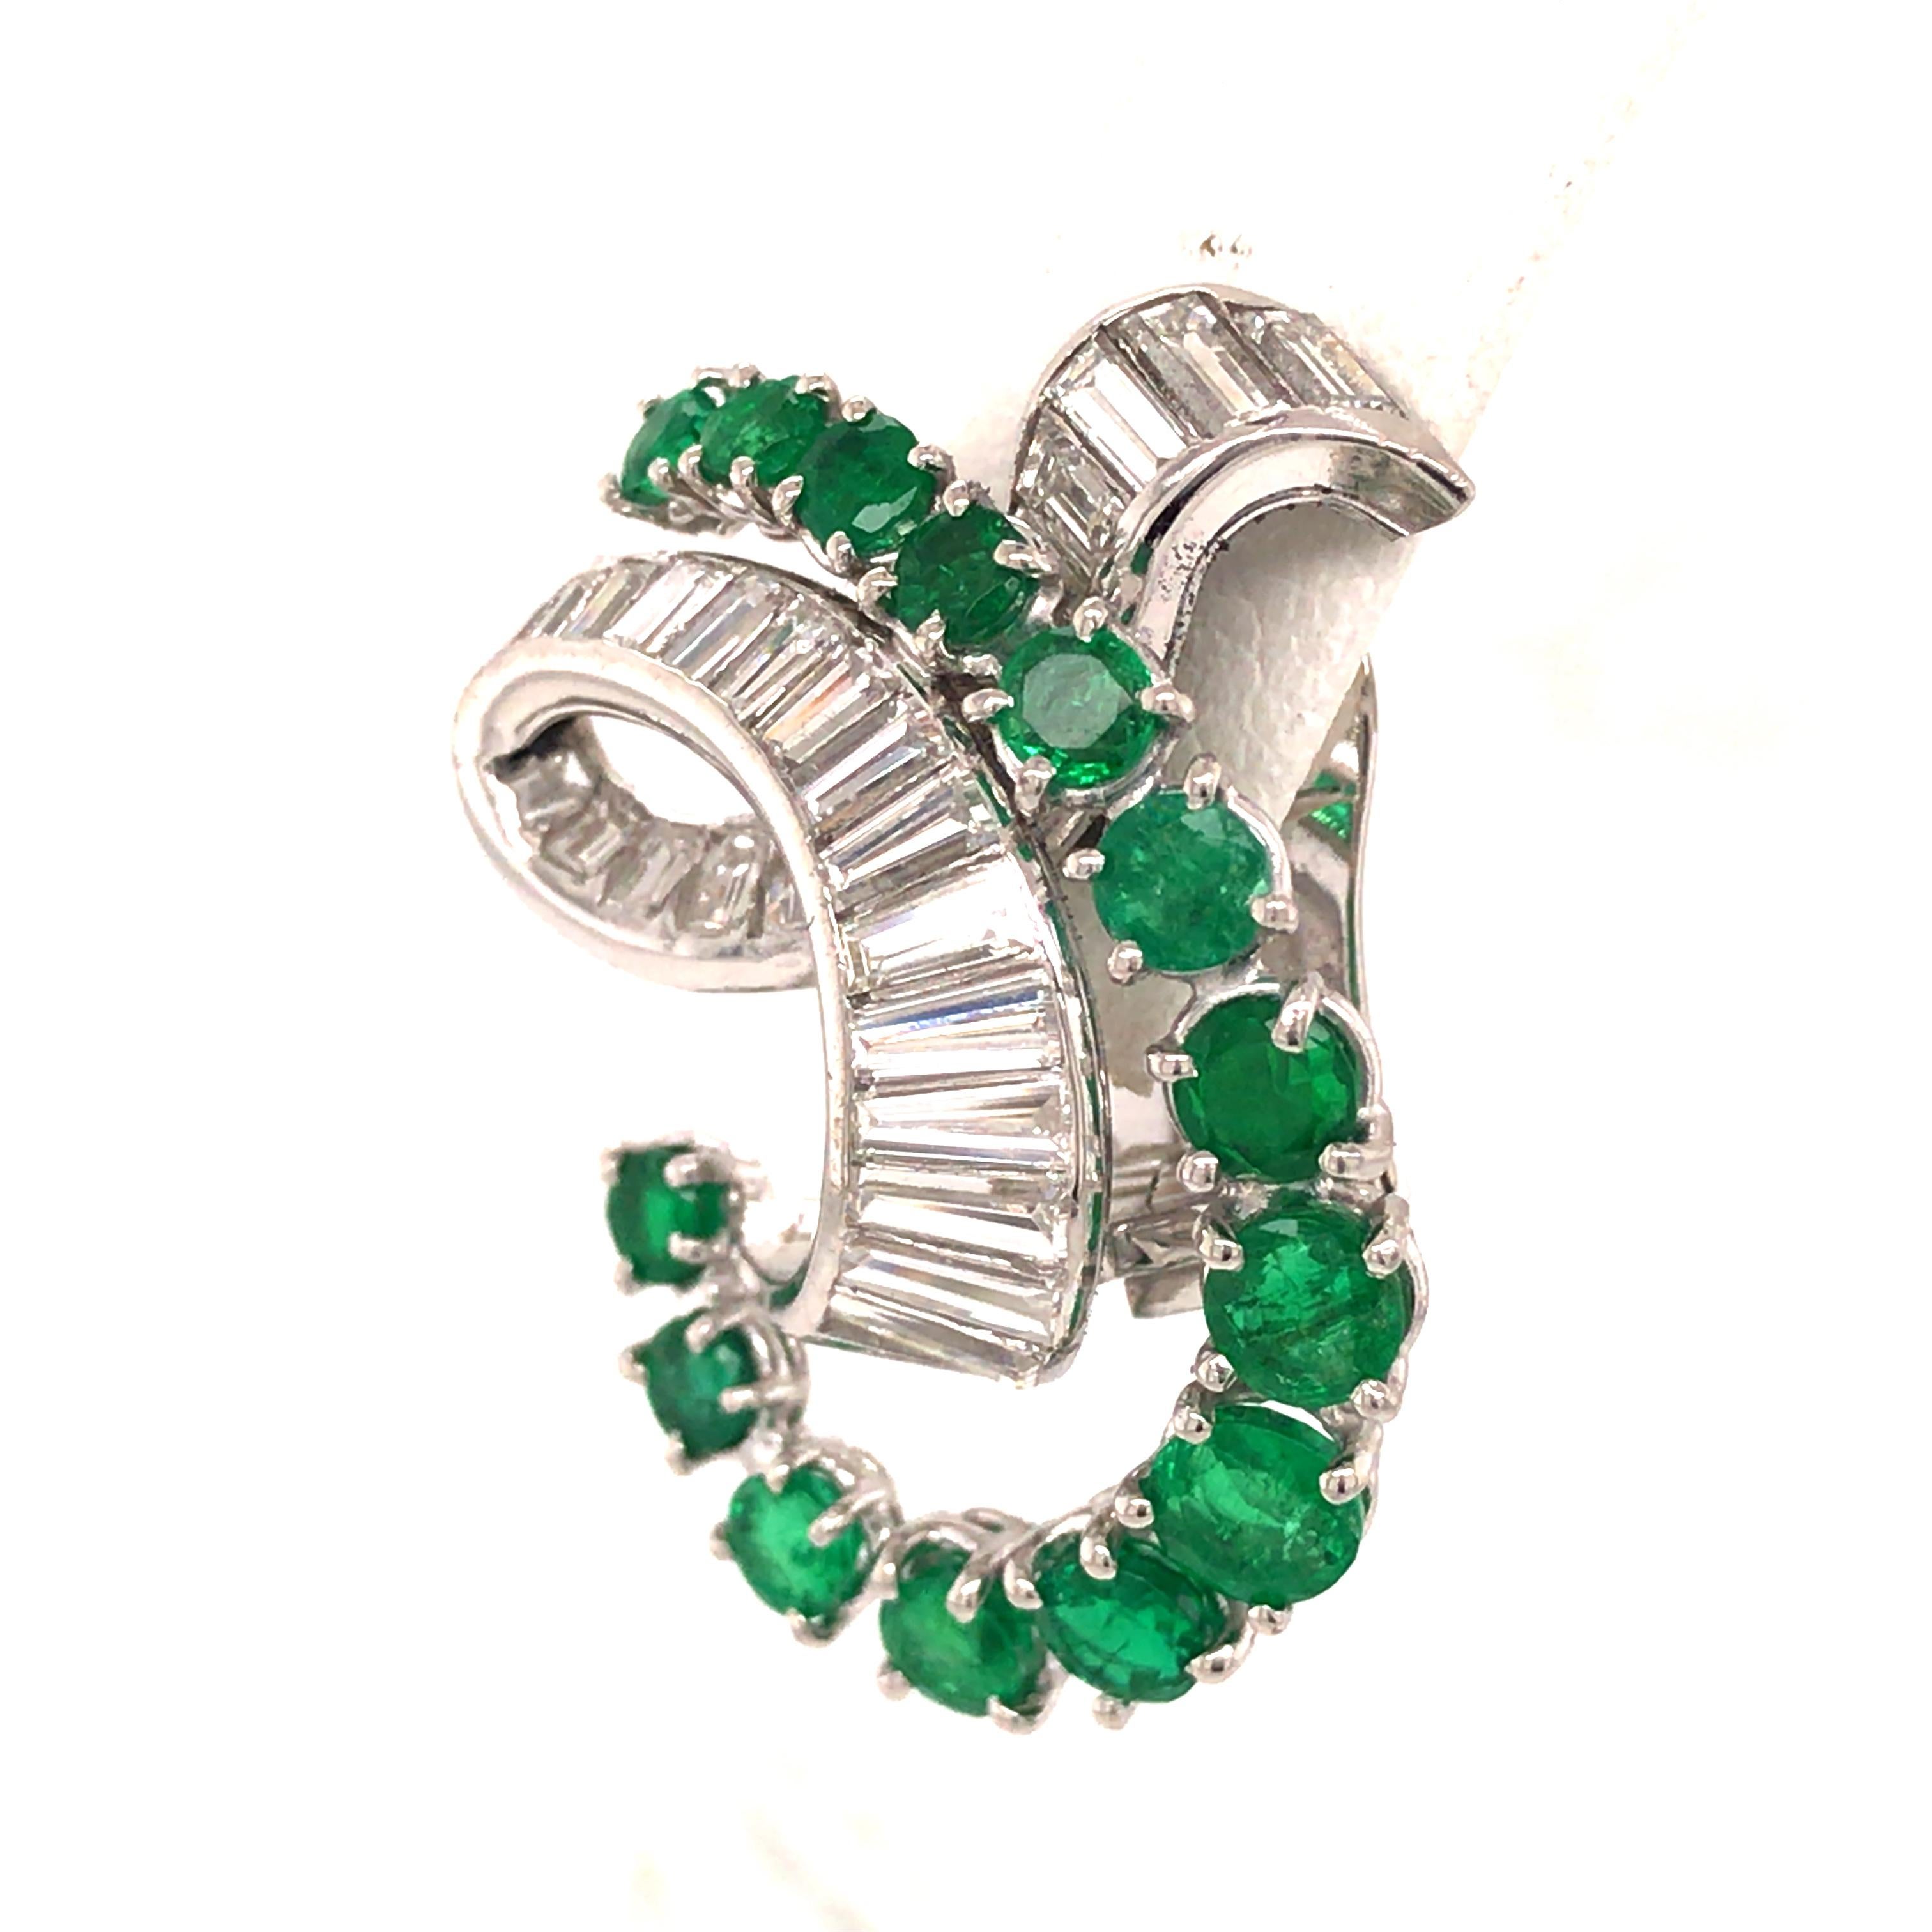 Art Deco Style Diamond and Emerald Earrings in Platinum.  (54) Baguette Diamonds weighing 4.43 carat total weight, G-H in color, VS-SI in clarity and (28) Round Green Emeralds weighing 4.19 carat total weight are expertly set.   The earrings measure